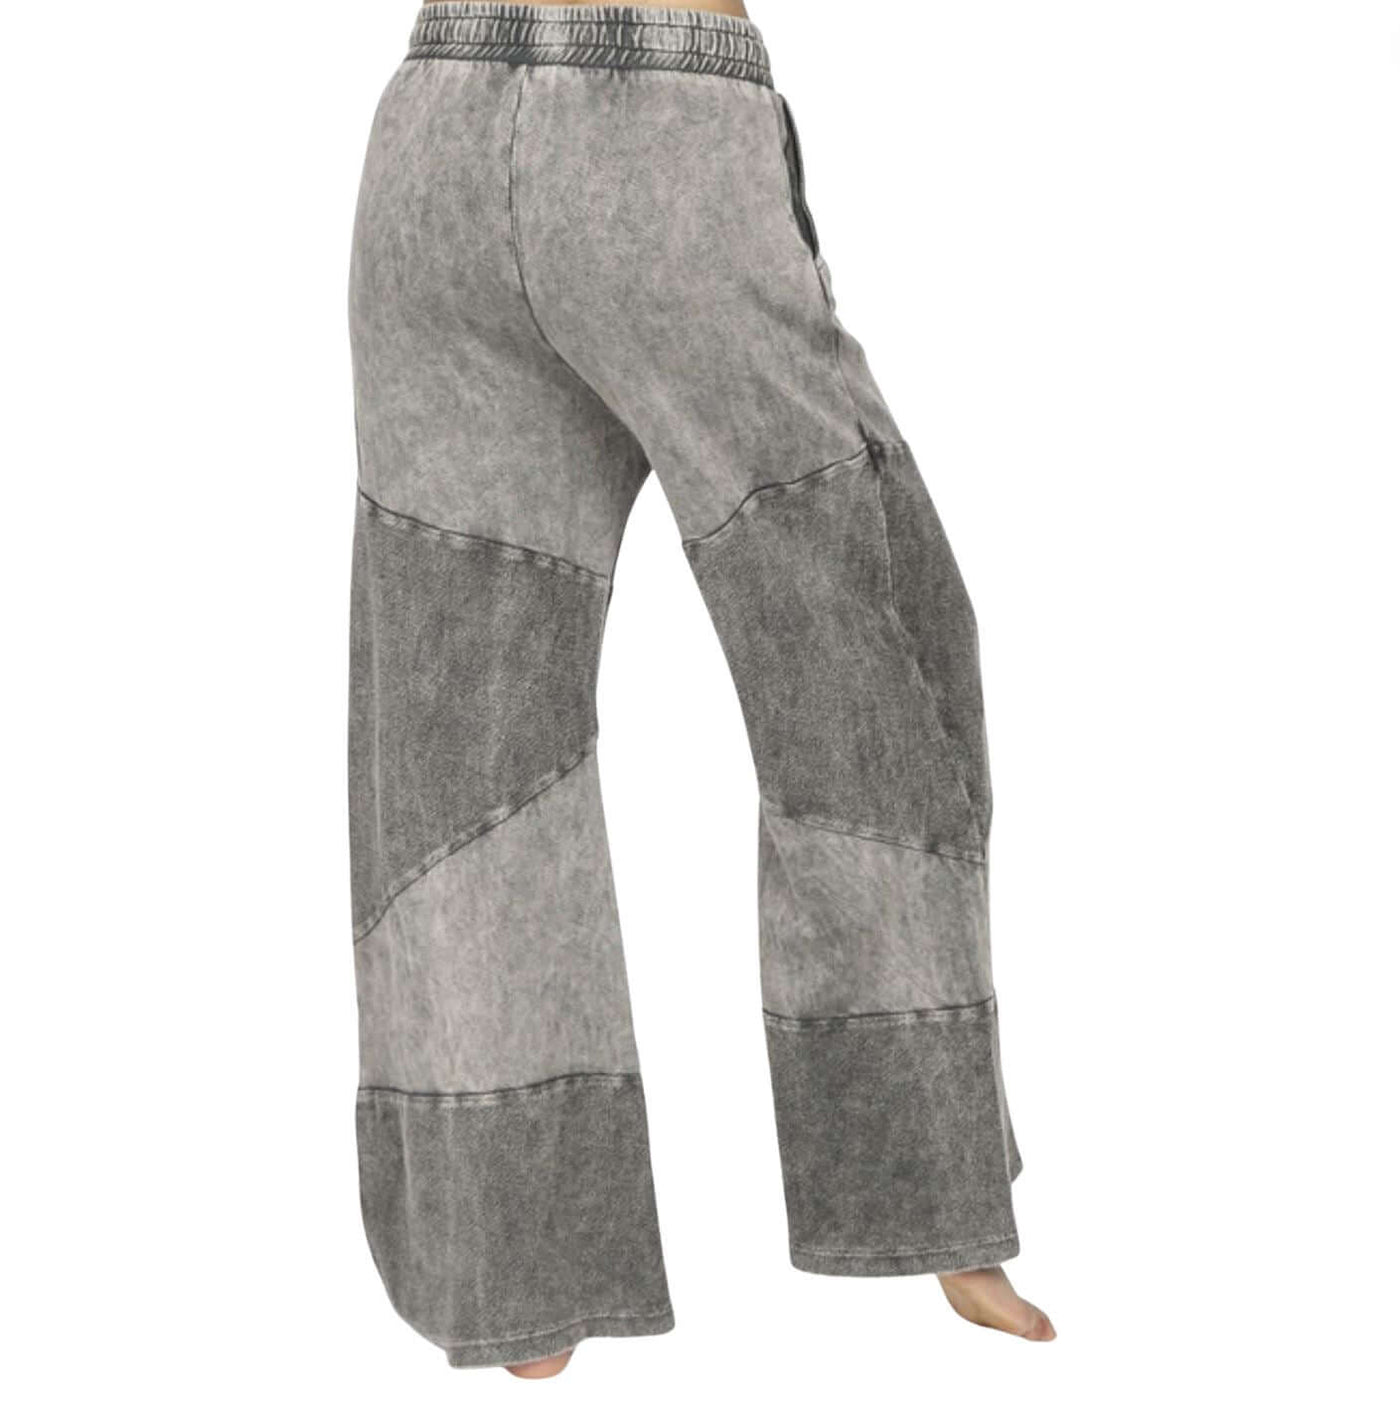 M. Rena Style# S4938 Ladies Luxury Cotton Wide Leg Terry Lounge Pants with Contrast Panels in Charcoal Gray | Made in USA | Women's Clothing Made in America